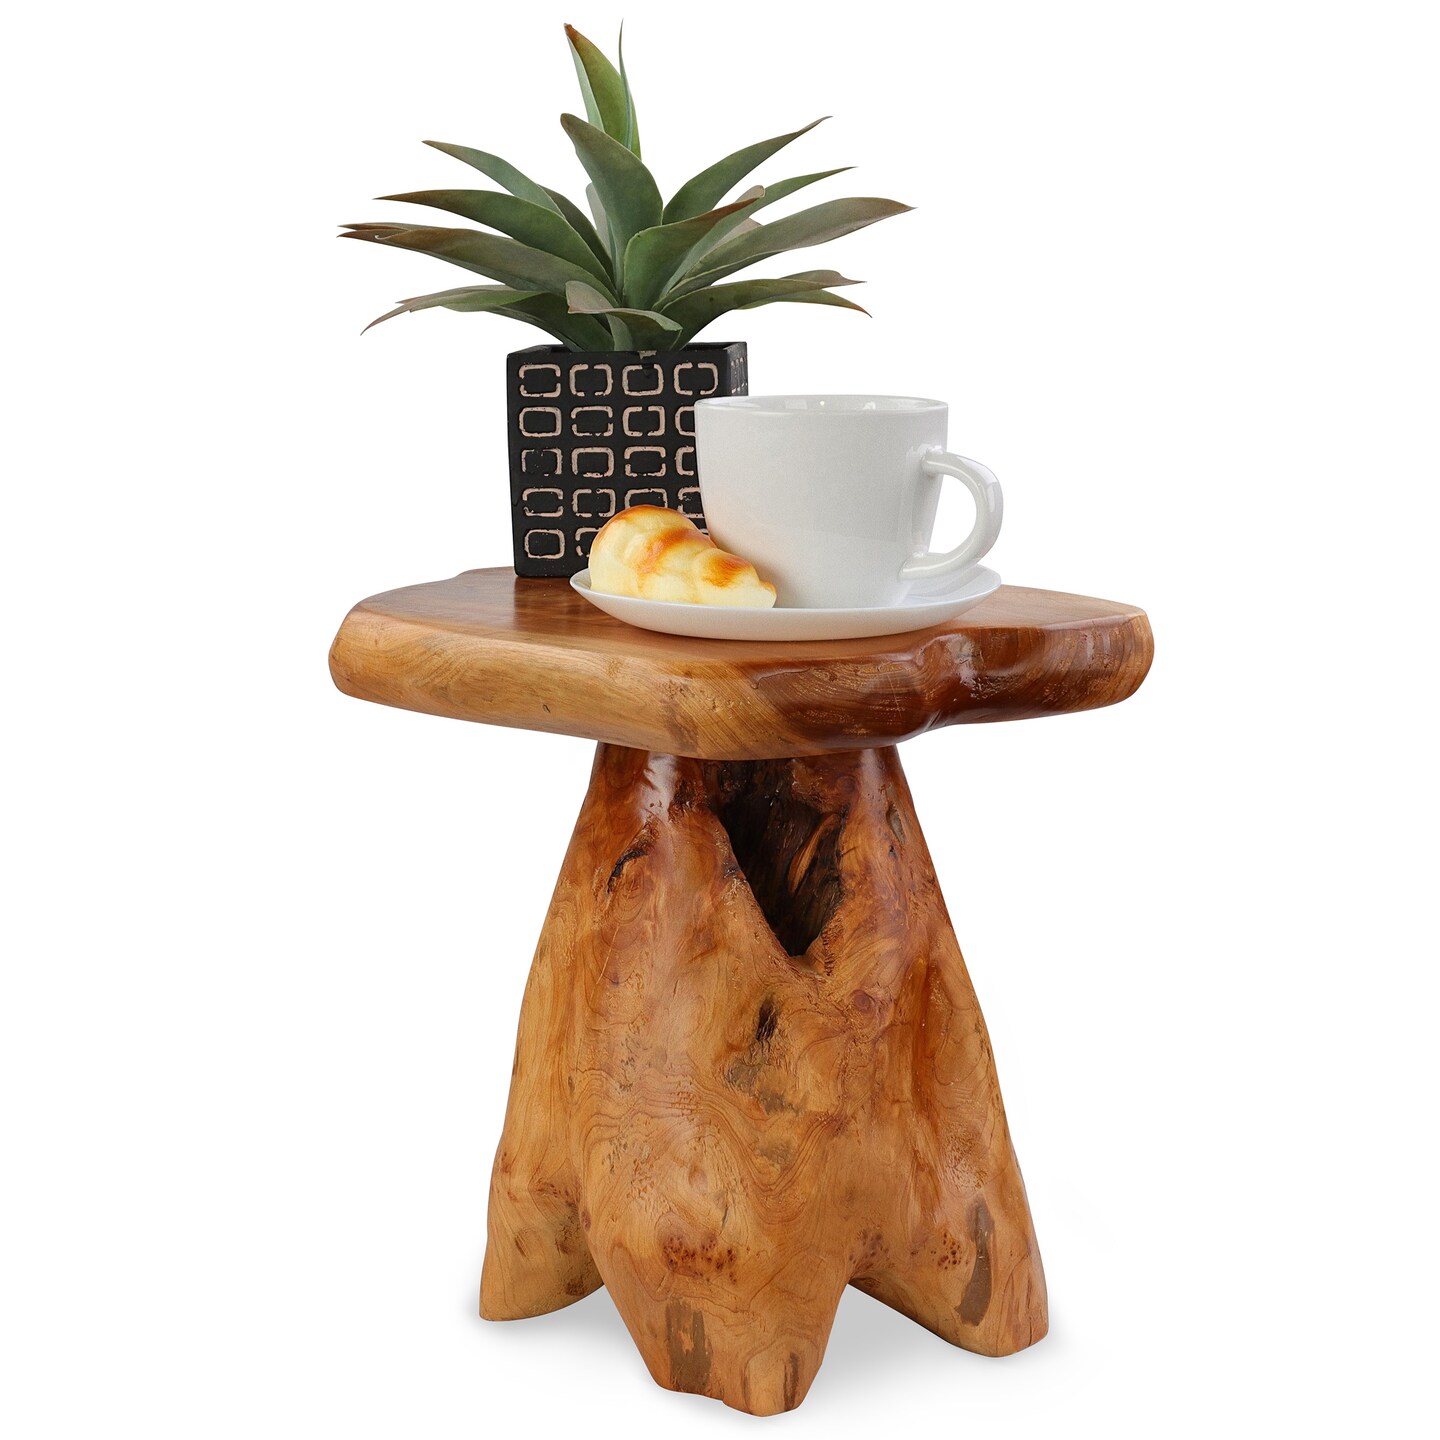 Creekview Home Emporium Tree Stump Side Table - 14in Log End Table Accent Stool